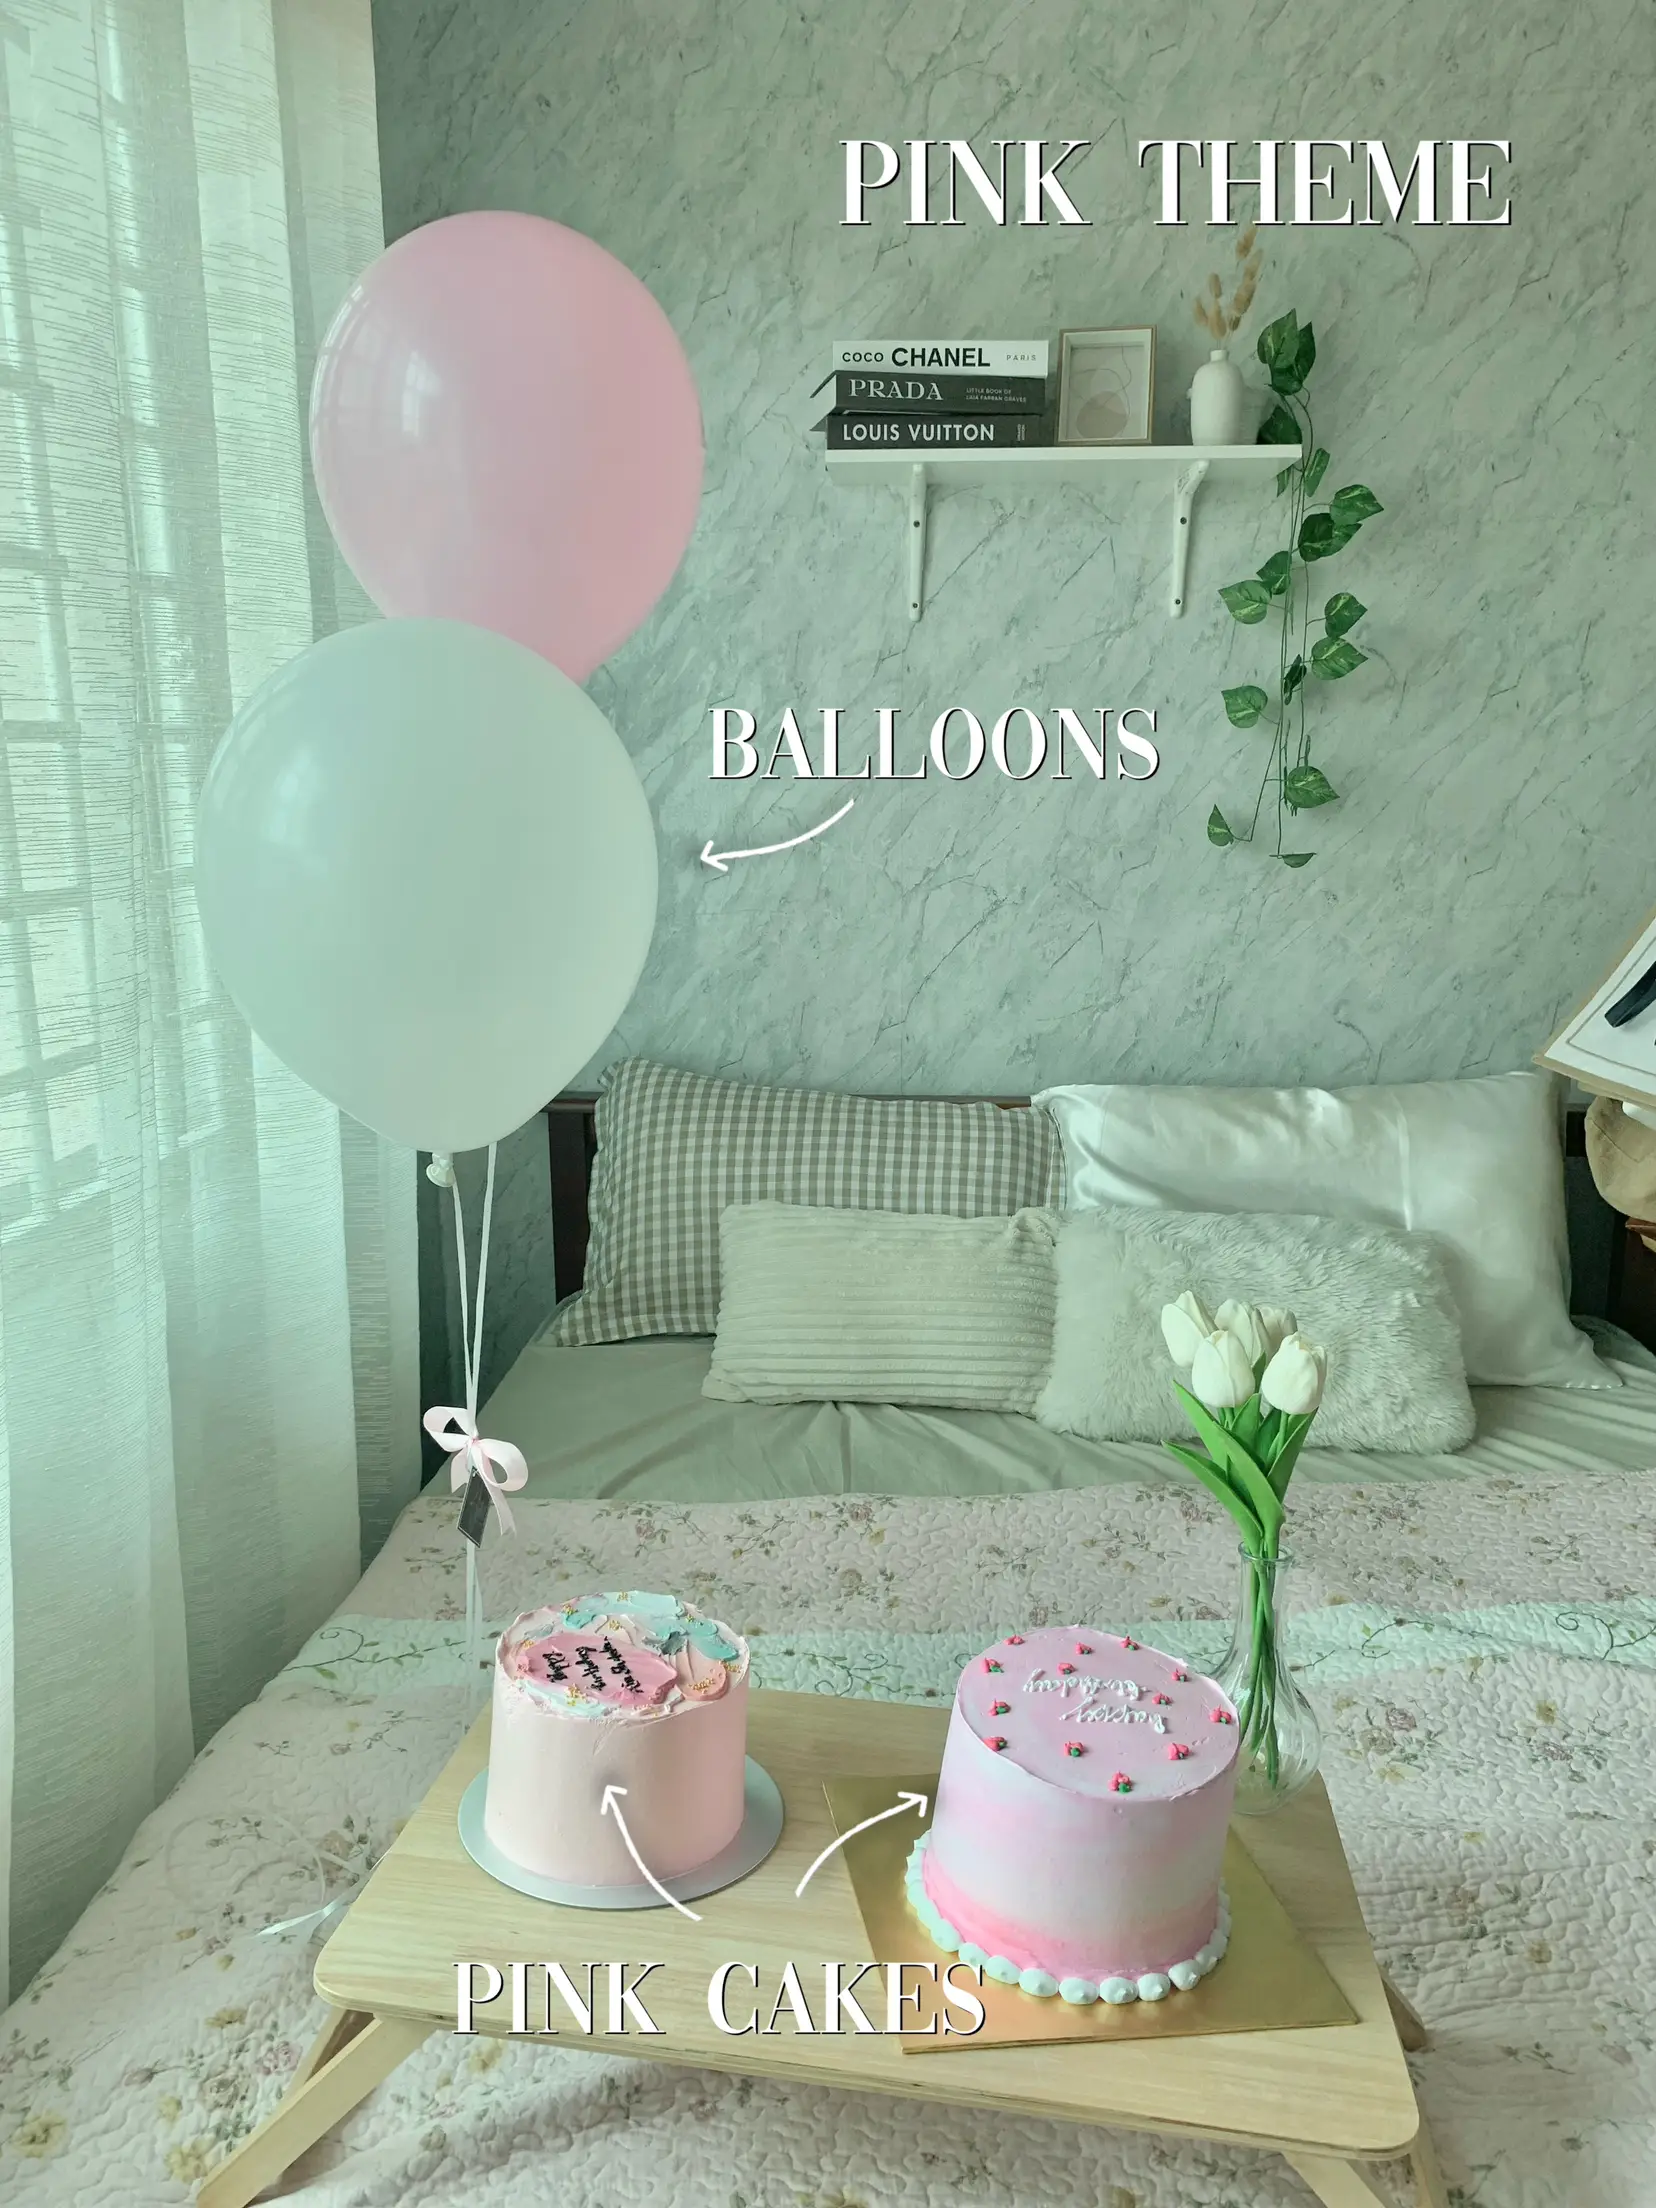 Match My Party Theme: Home  Louis vuitton birthday party, Louis vuitton  birthday, Chanel birthday party